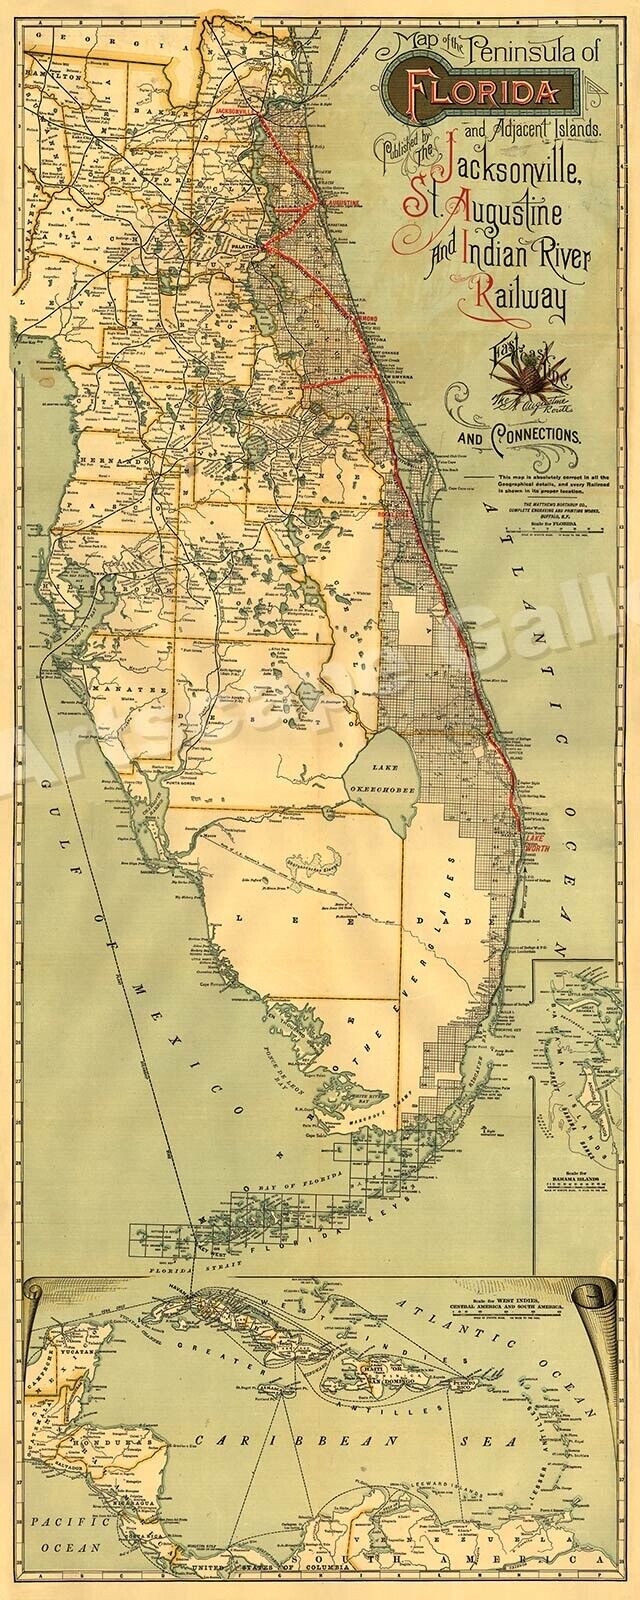 1893 Map of the Peninsula of Florida & Railroad Line Map - 16x36